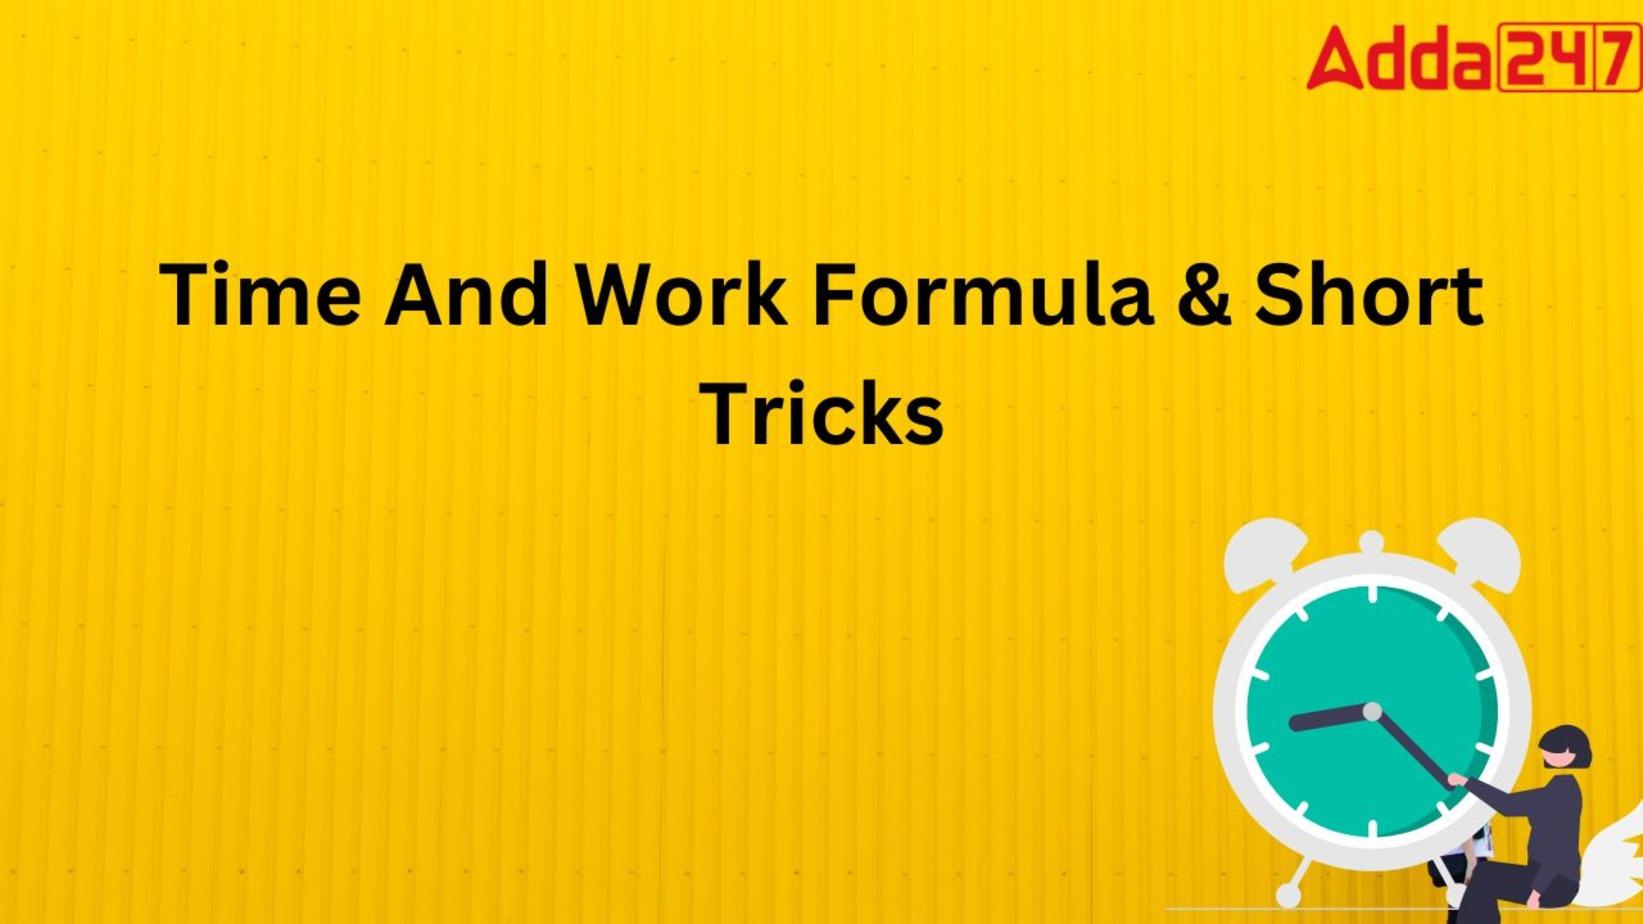 Time and Work Formula, Questions, PDF, Efficiency, & Tricks_30.1